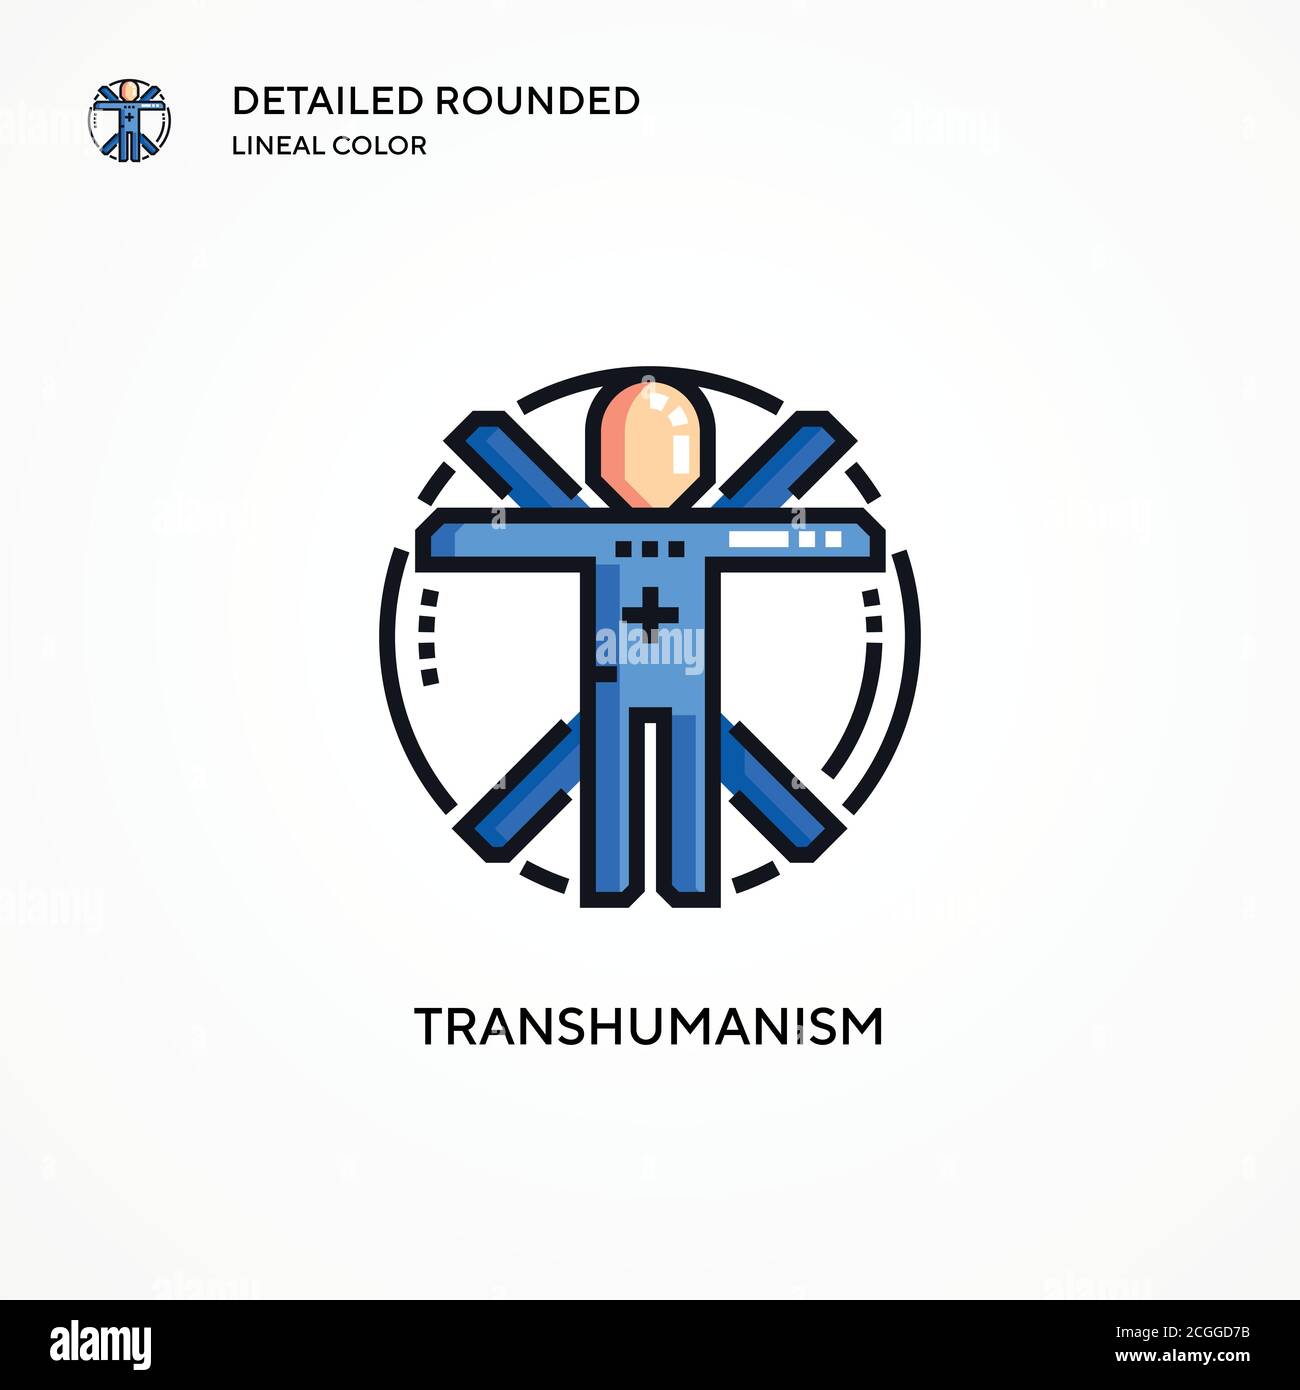 Transhumanism vector icon. Modern vector illustration concepts. Easy to edit and customize. Stock Vector